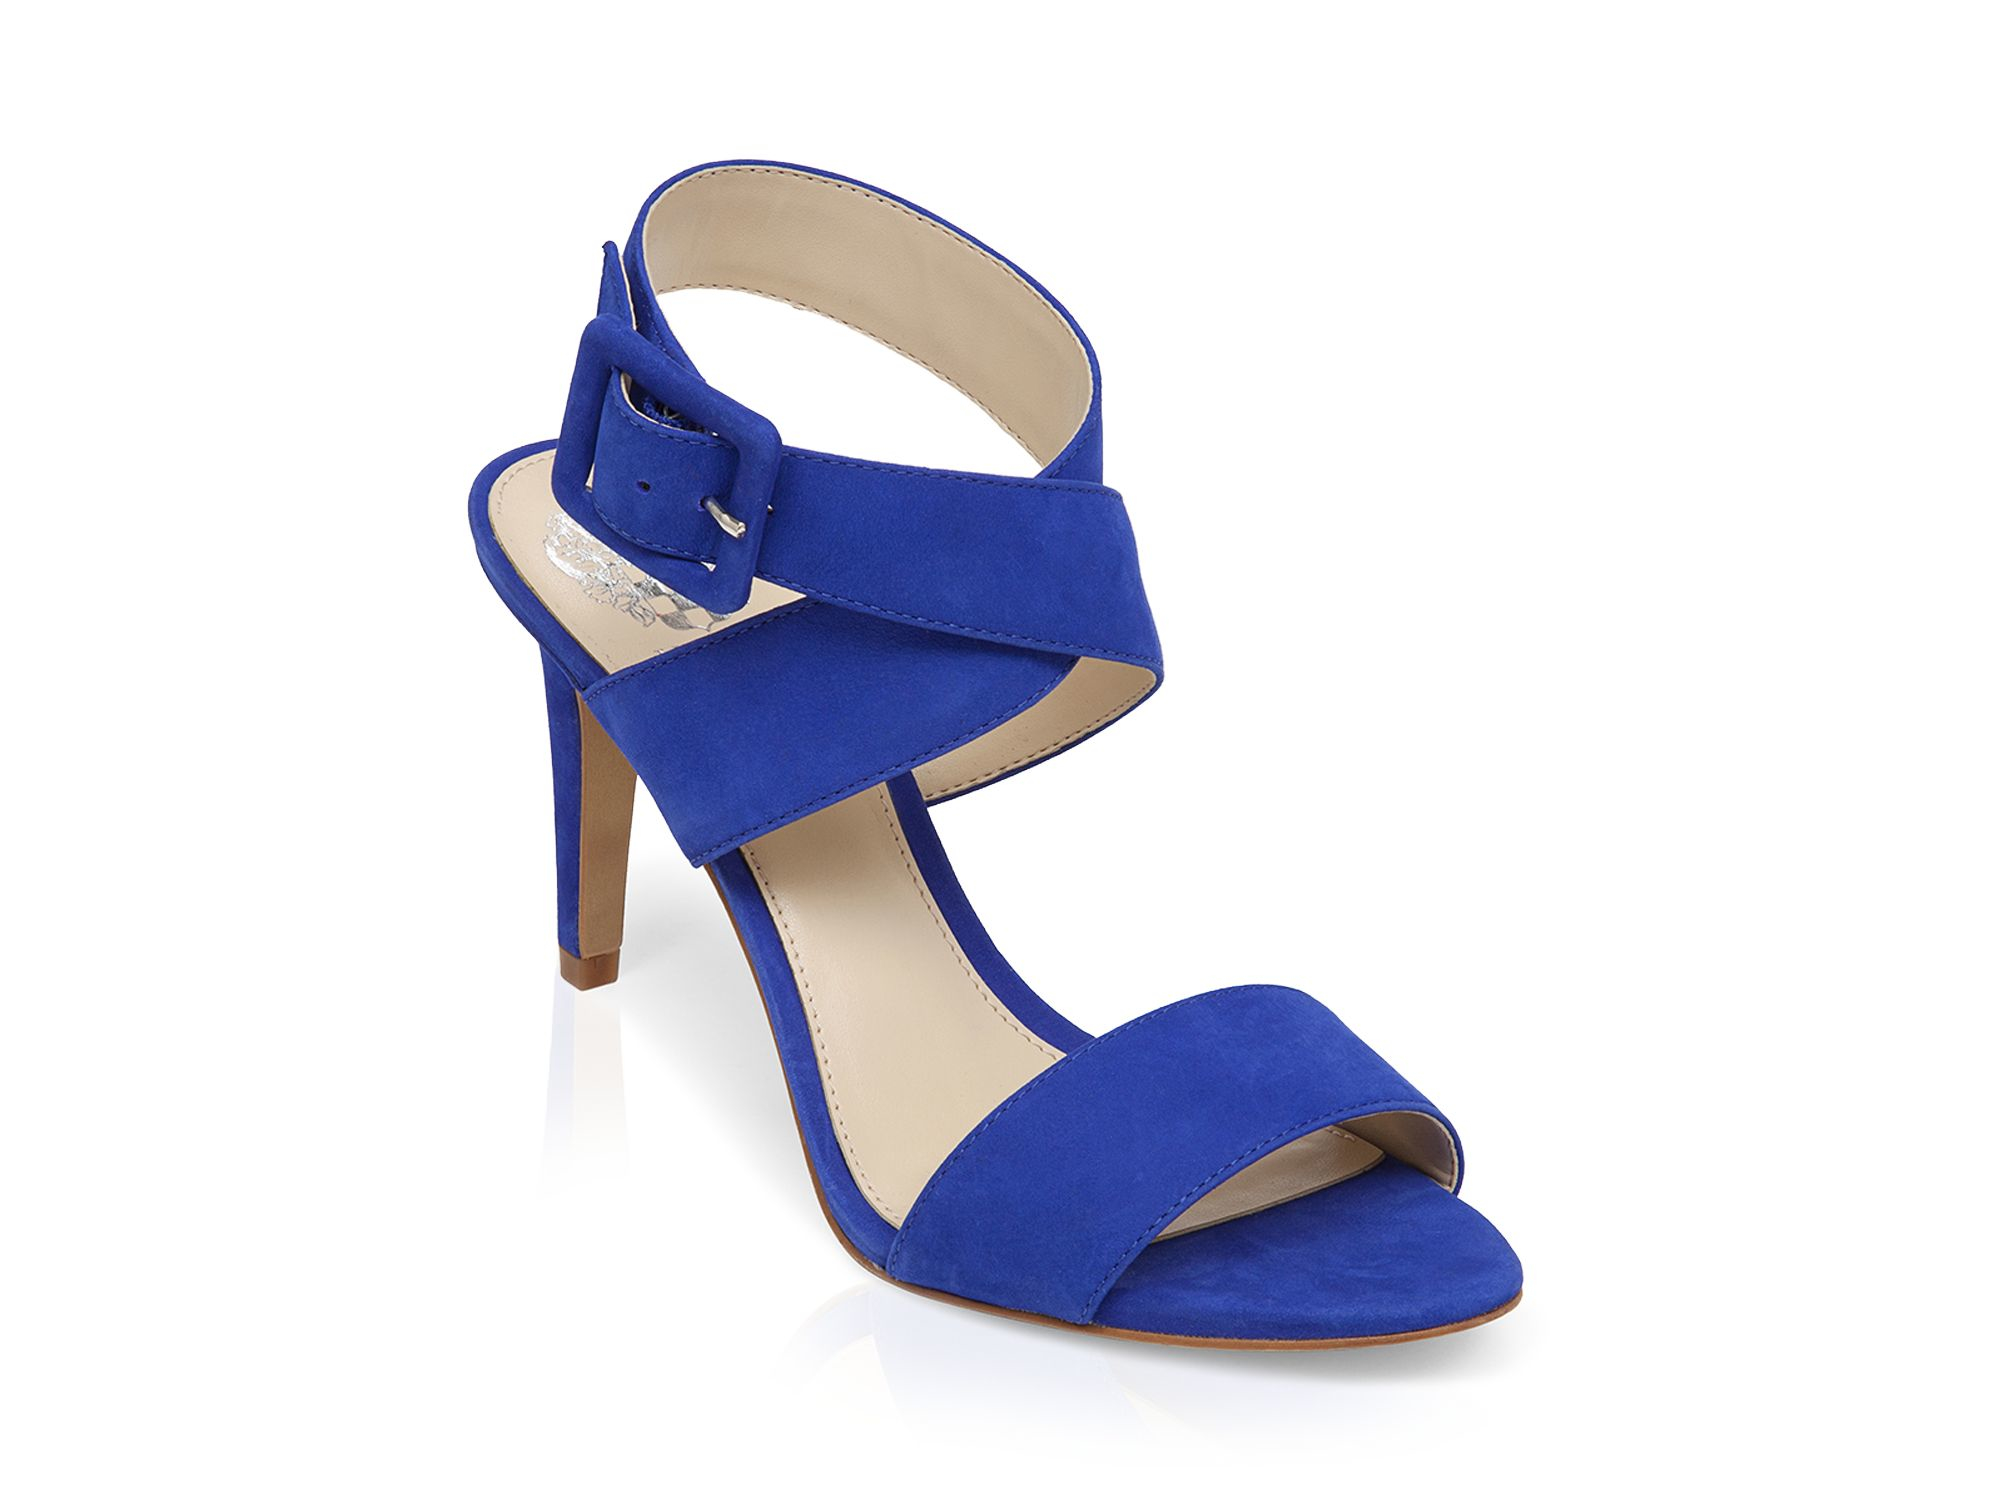 Lyst - Vince Camuto Open Toe Sandals - Casara High Heel in Blue